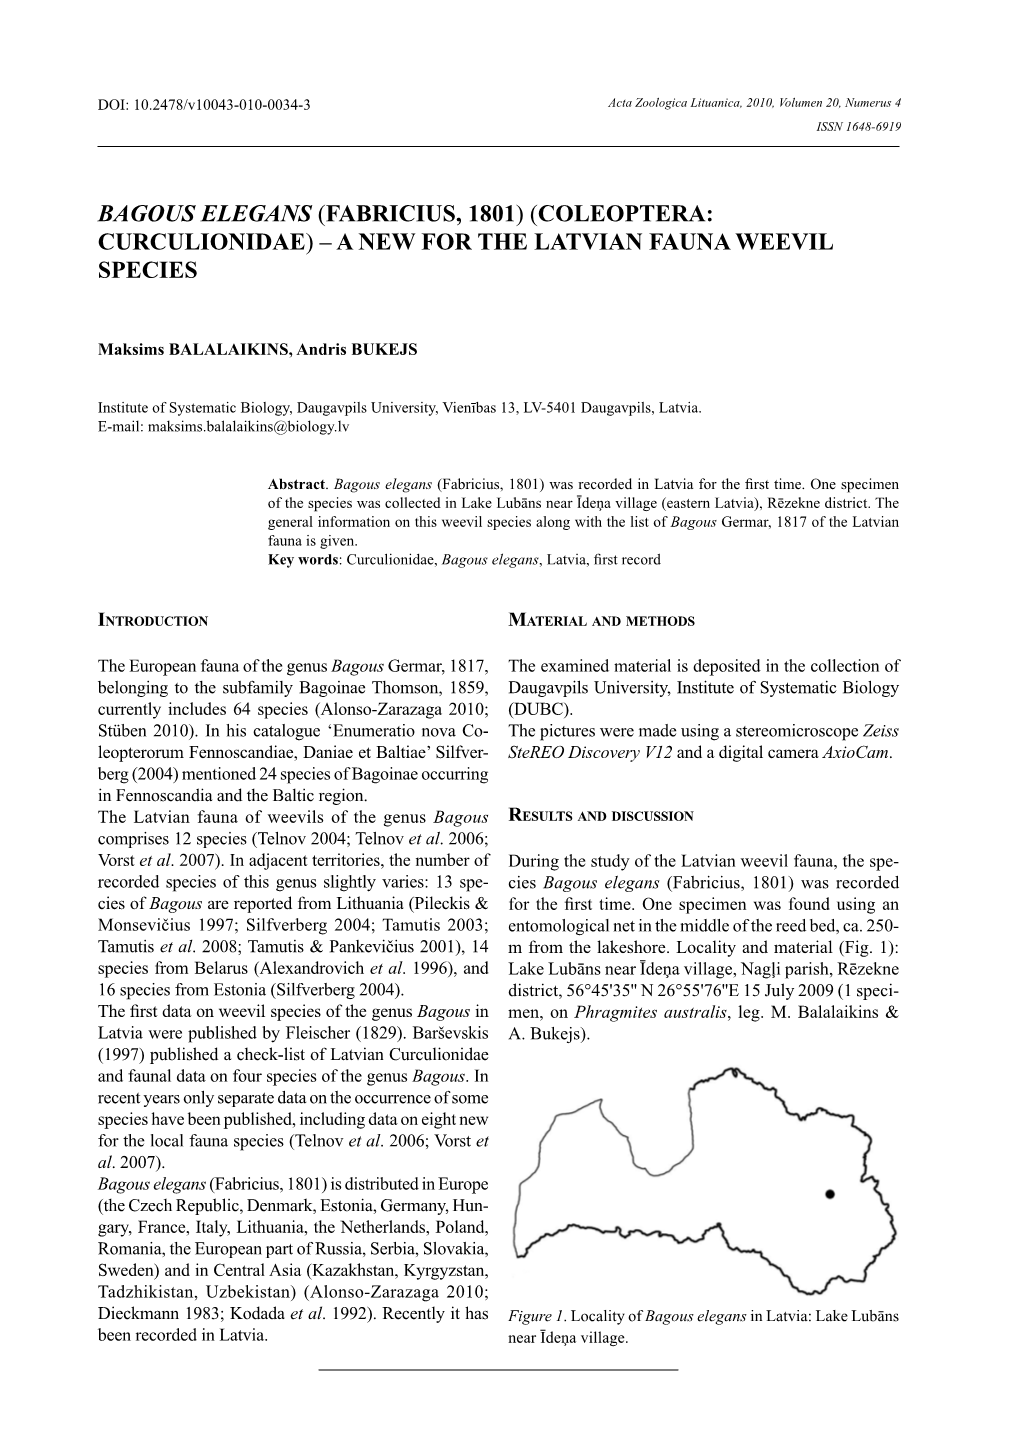 Bagous Elegans (Fabricius, 1801) (Coleoptera: Curculionidae) – a New for the Latvian Fauna Weevil Species